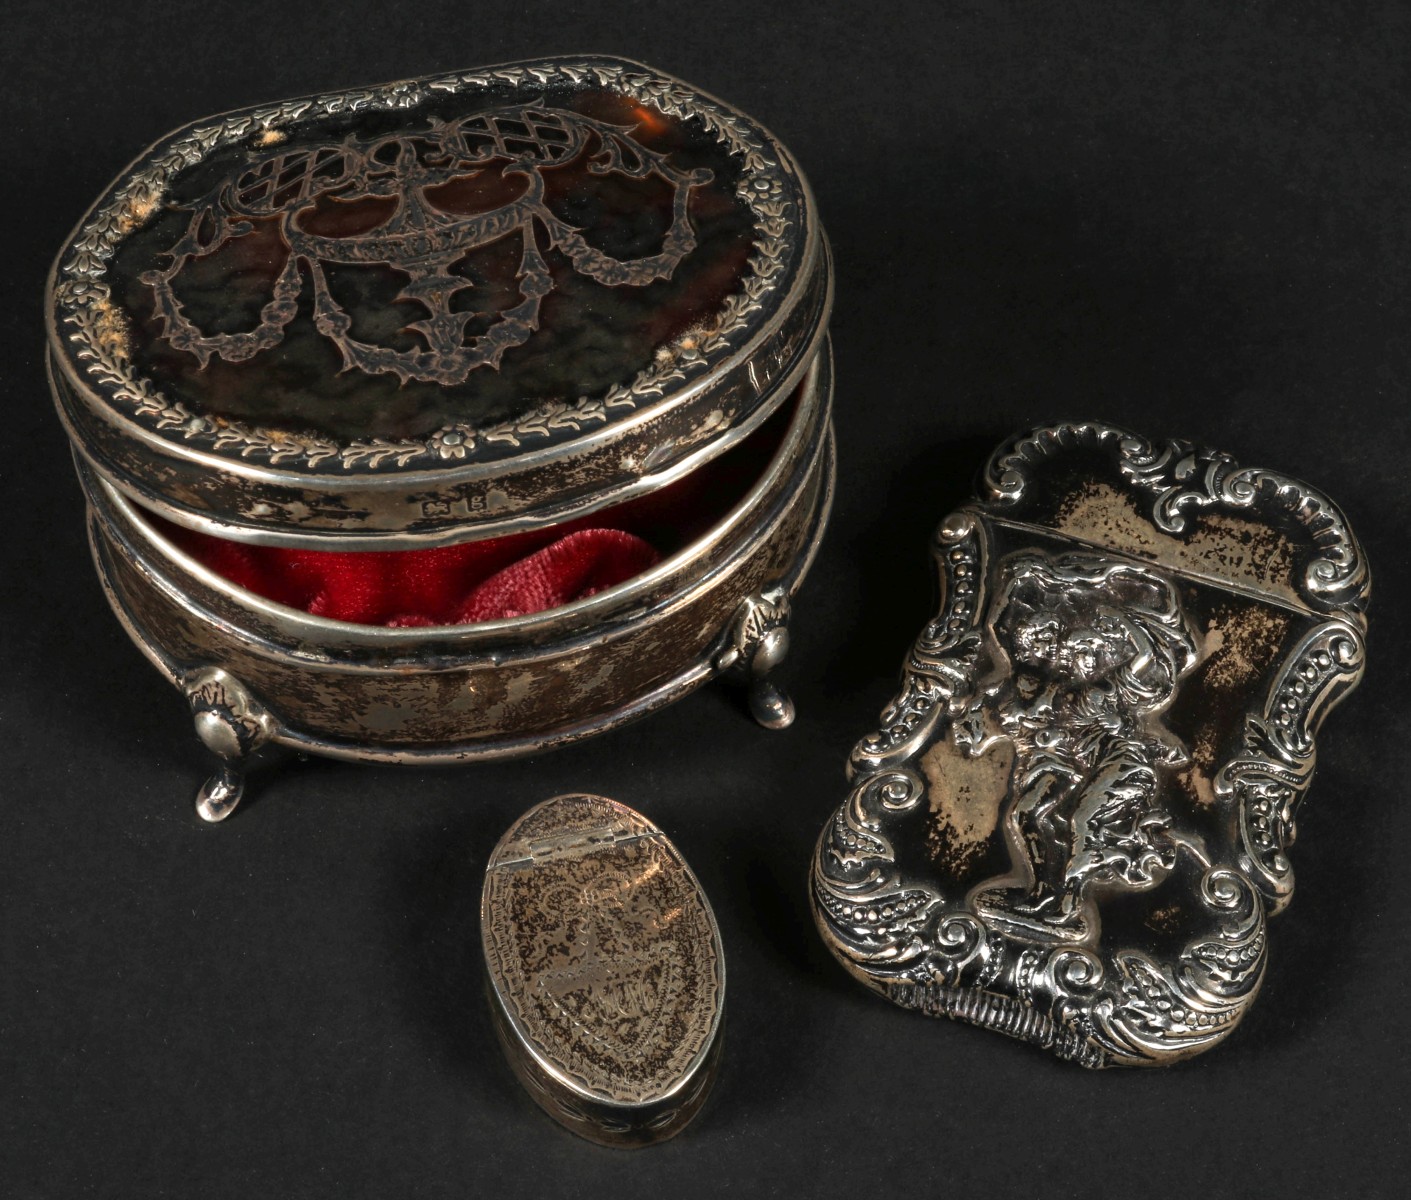 THREE 19TH CENTURY BRITISH STERLING SILVER CONTAINERS